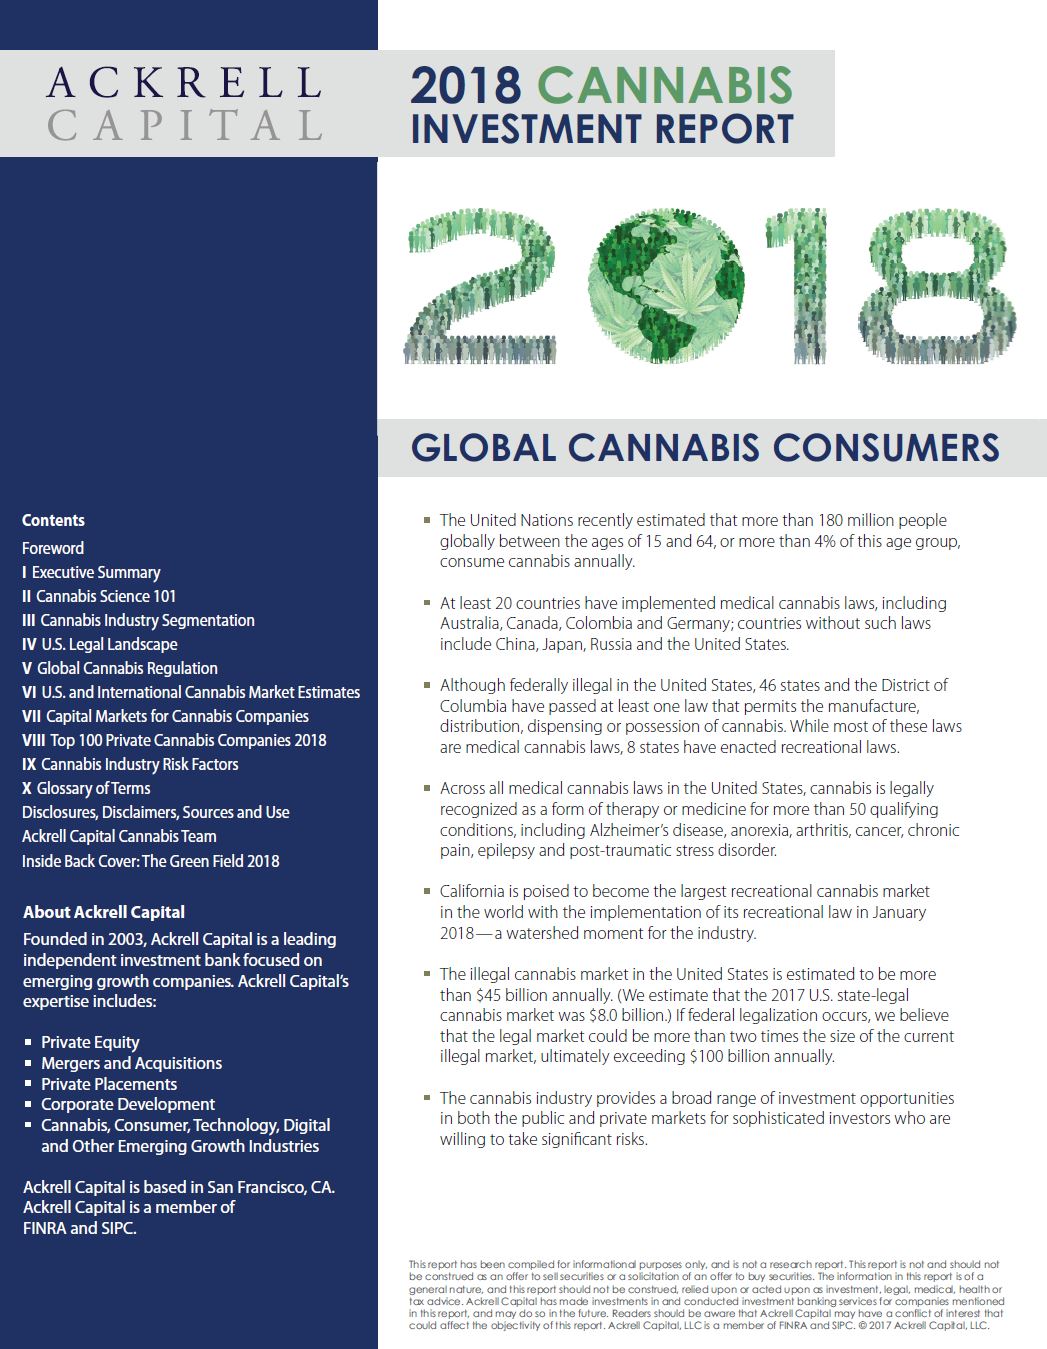 Ackrell Capital: 2018 Cannabis Investment Report